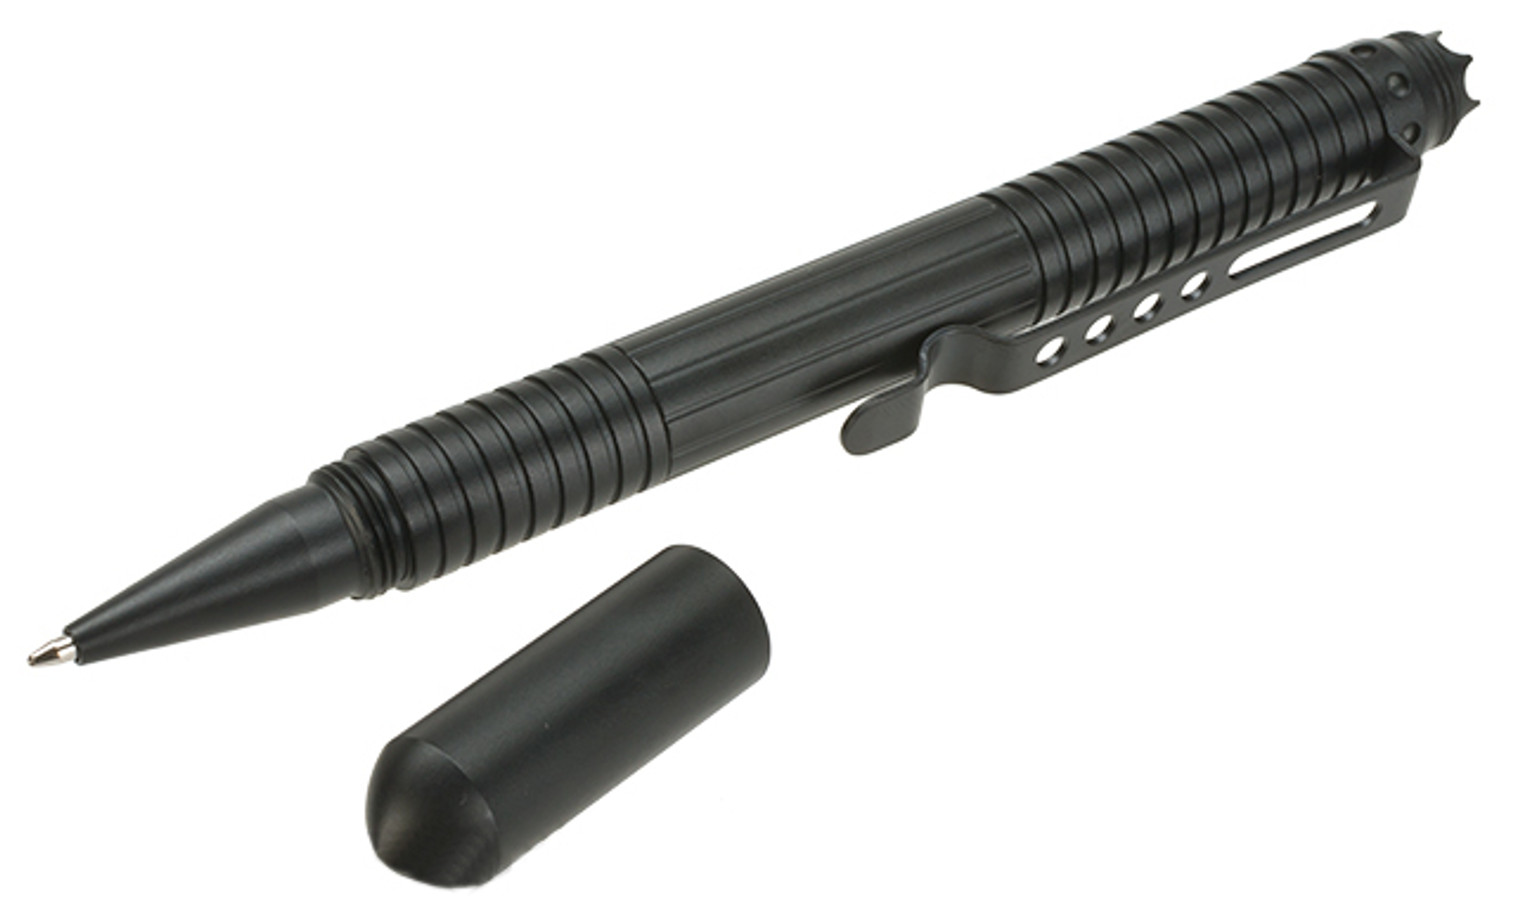 EDC Tactical Pen with Crew Cap Ballpoint Pen and DNA Crown with Pocket Clip - Black